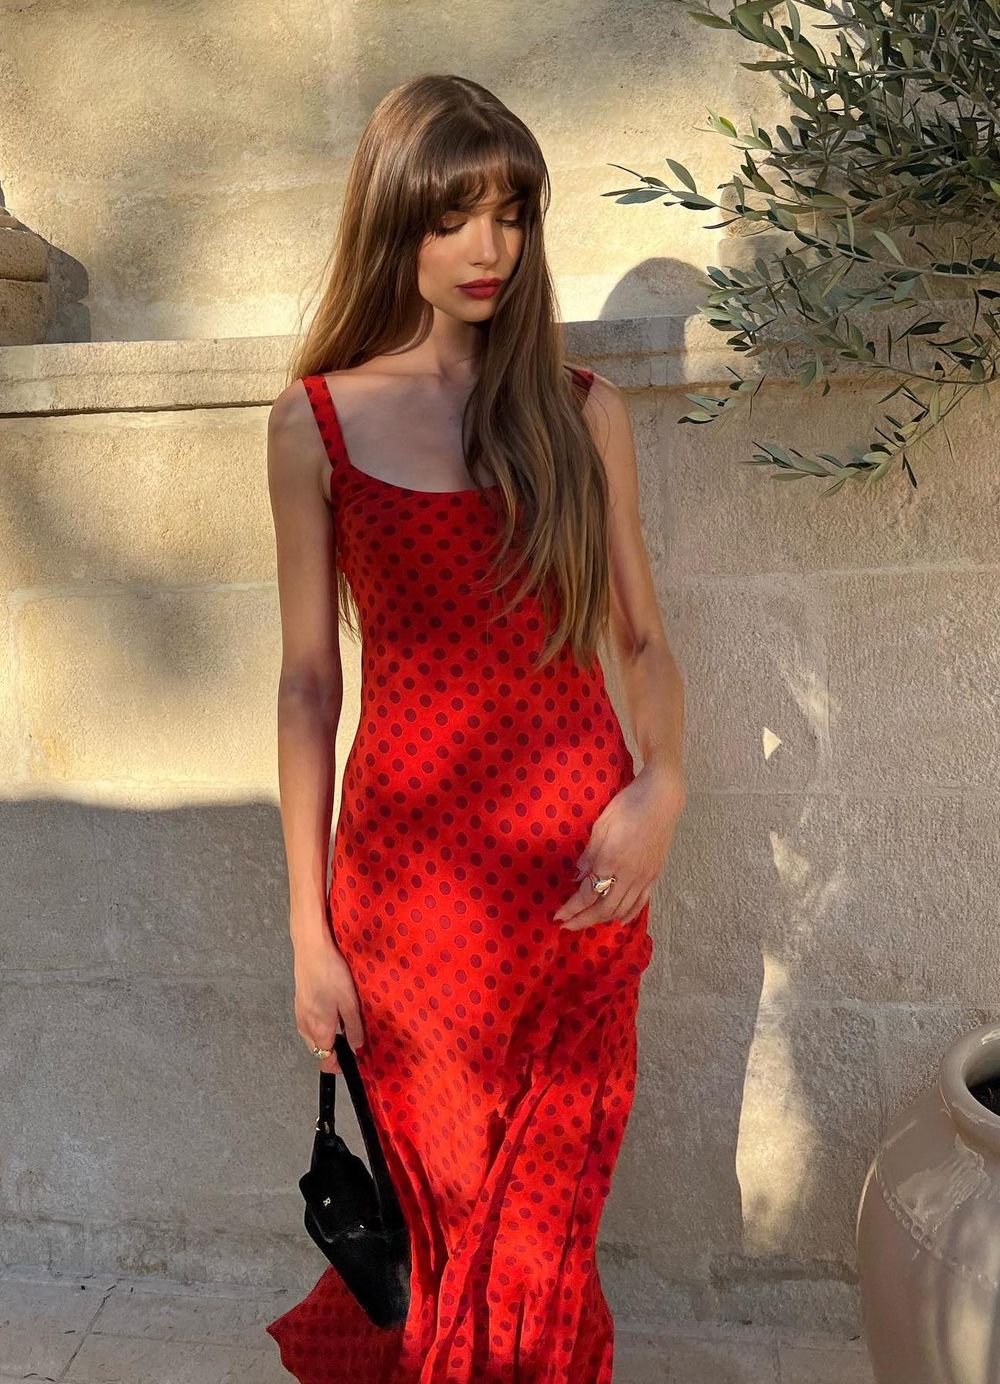 French girl summer outfits red dress maralafontan